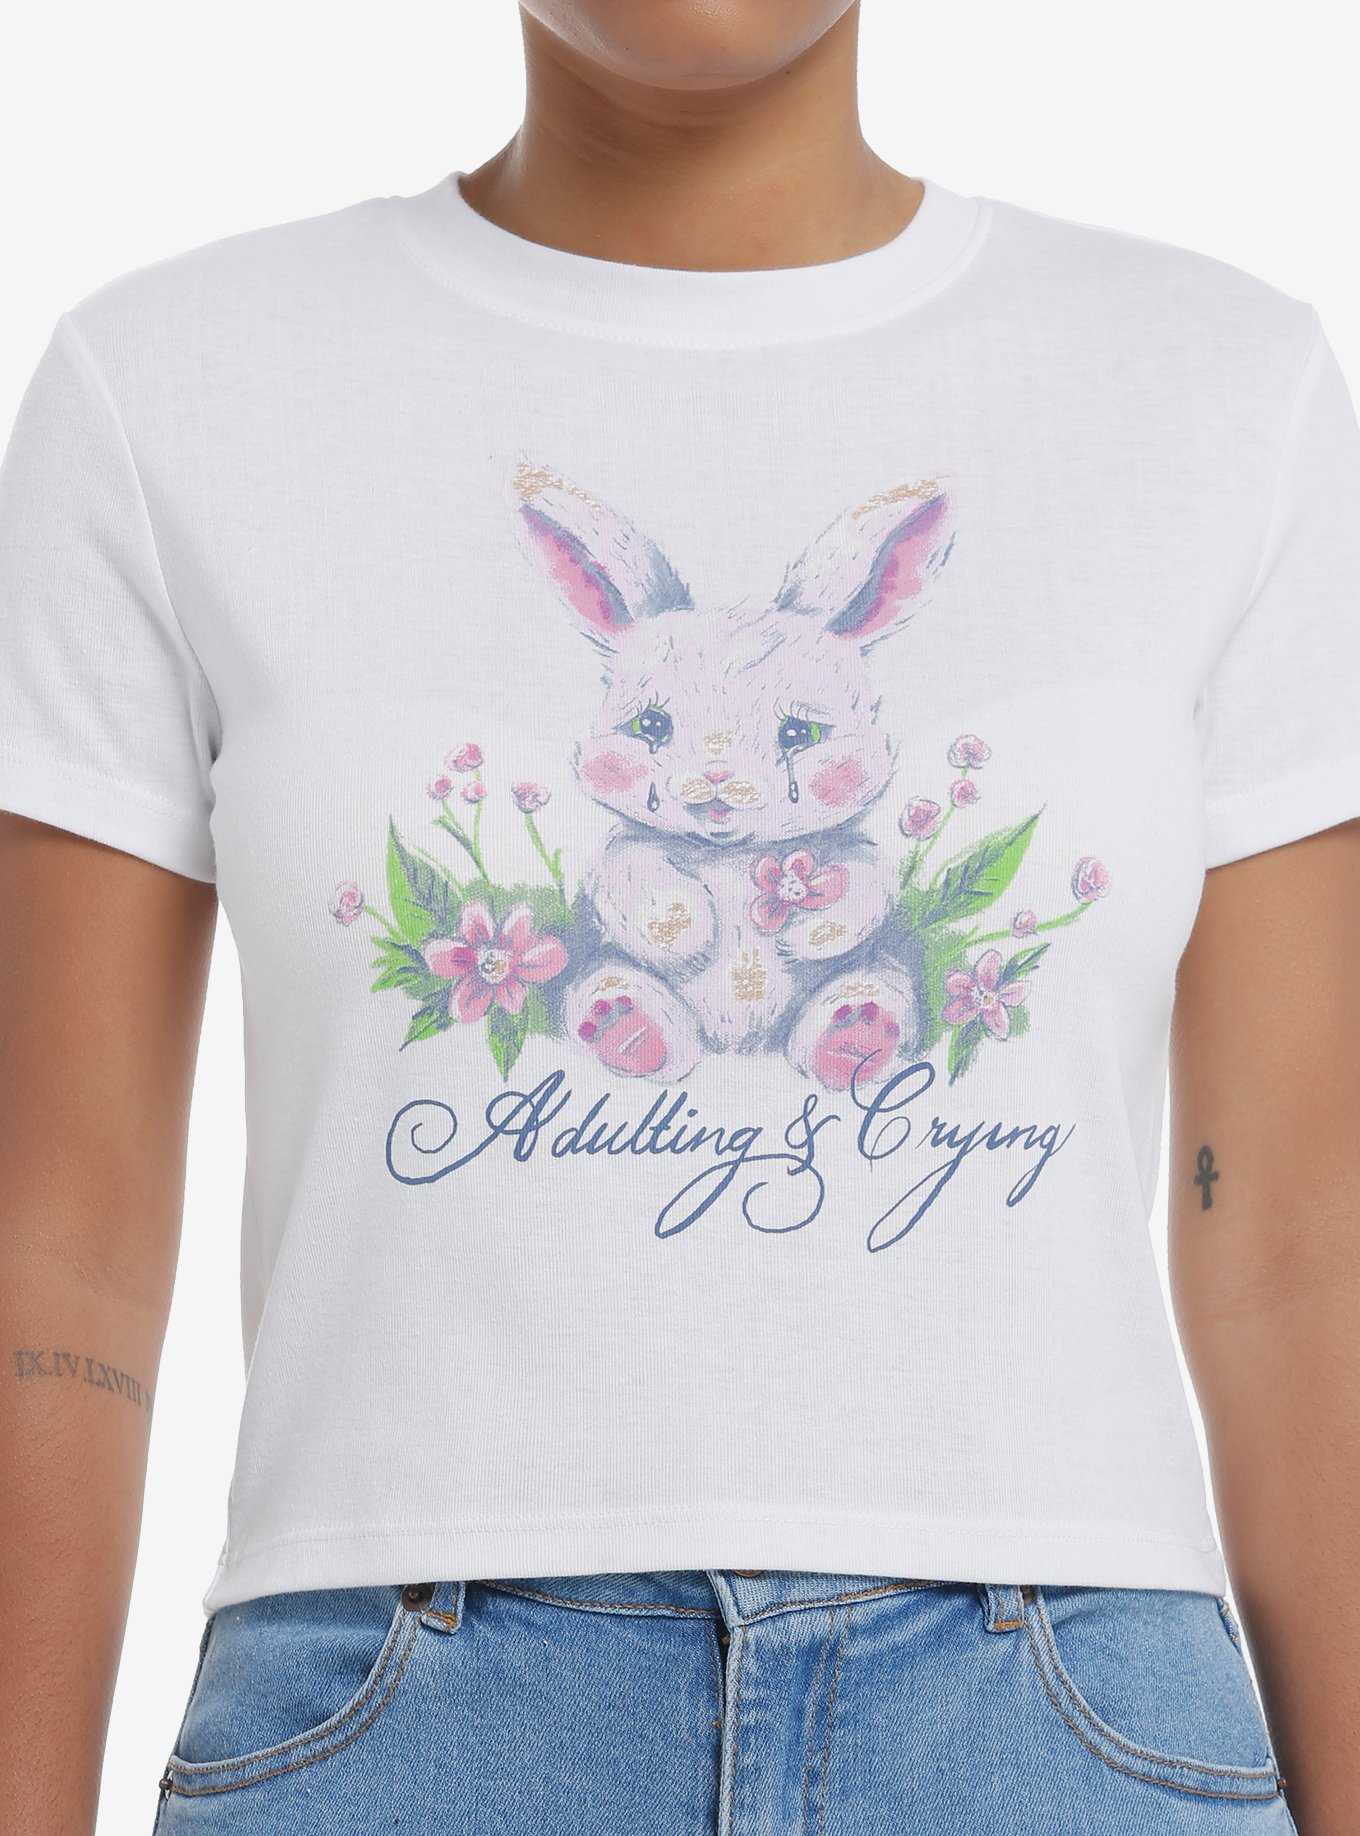 Bunny Adulting & Crying Girls Baby T-Shirt, , hi-res